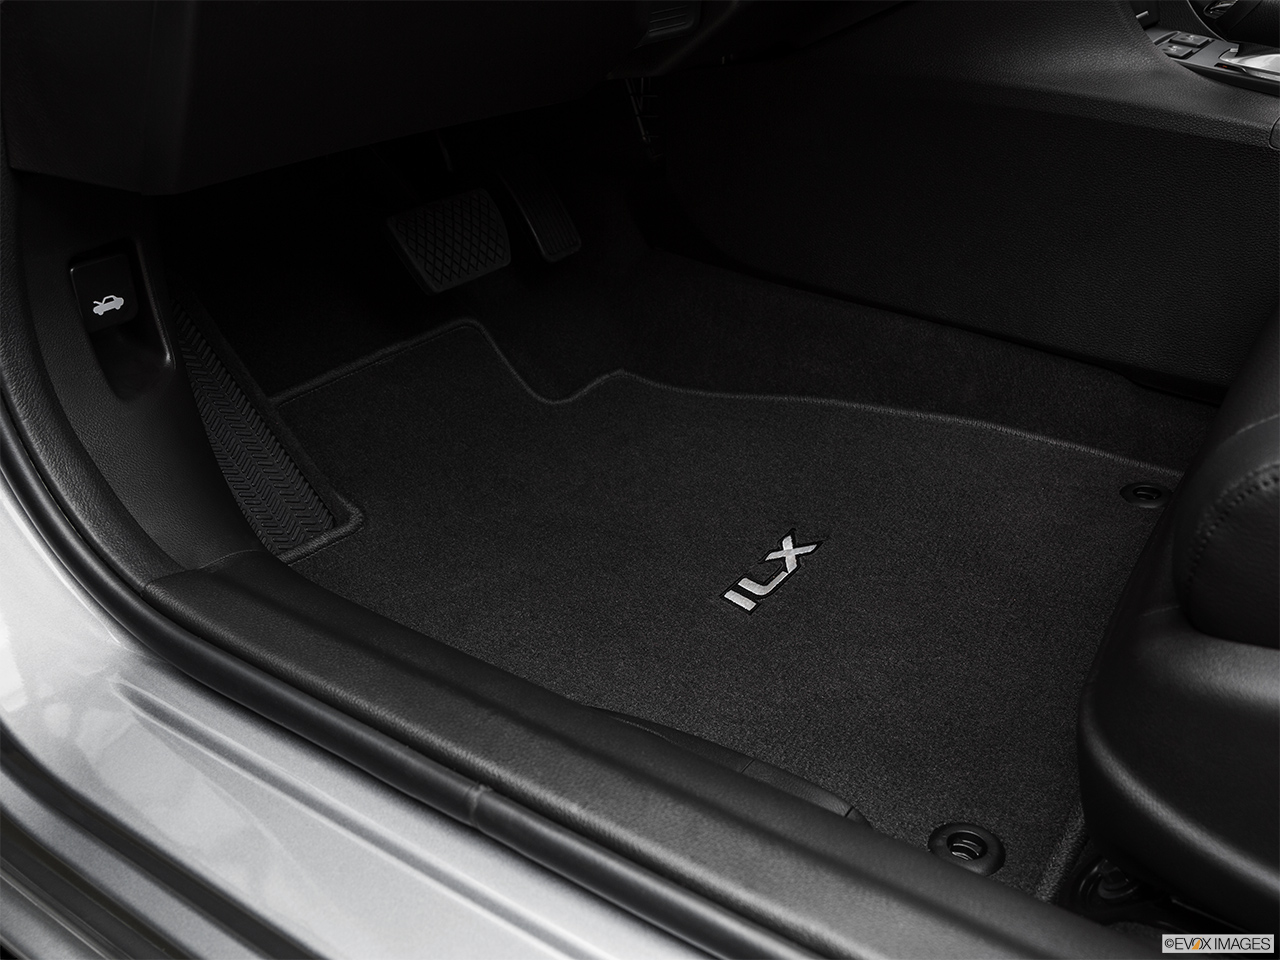 2017 Acura ILX Base Driver's floor mat and pedals. Mid-seat level from outside looking in. 